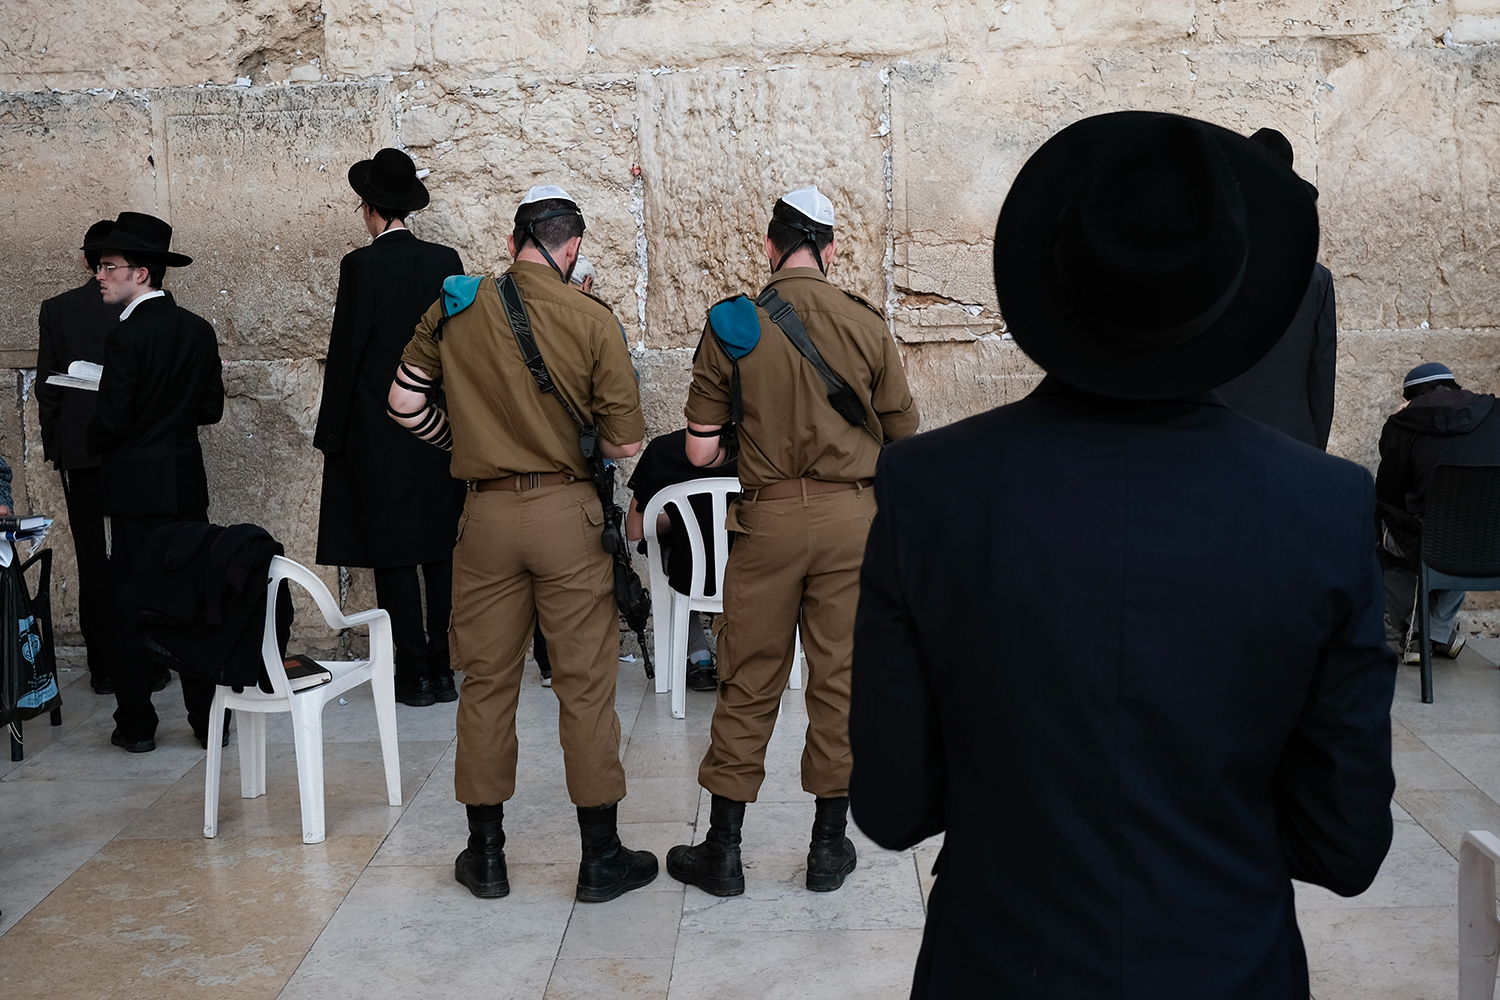  Israeli soldiers join others in prayer at the Western Wall in Jerusalem. 